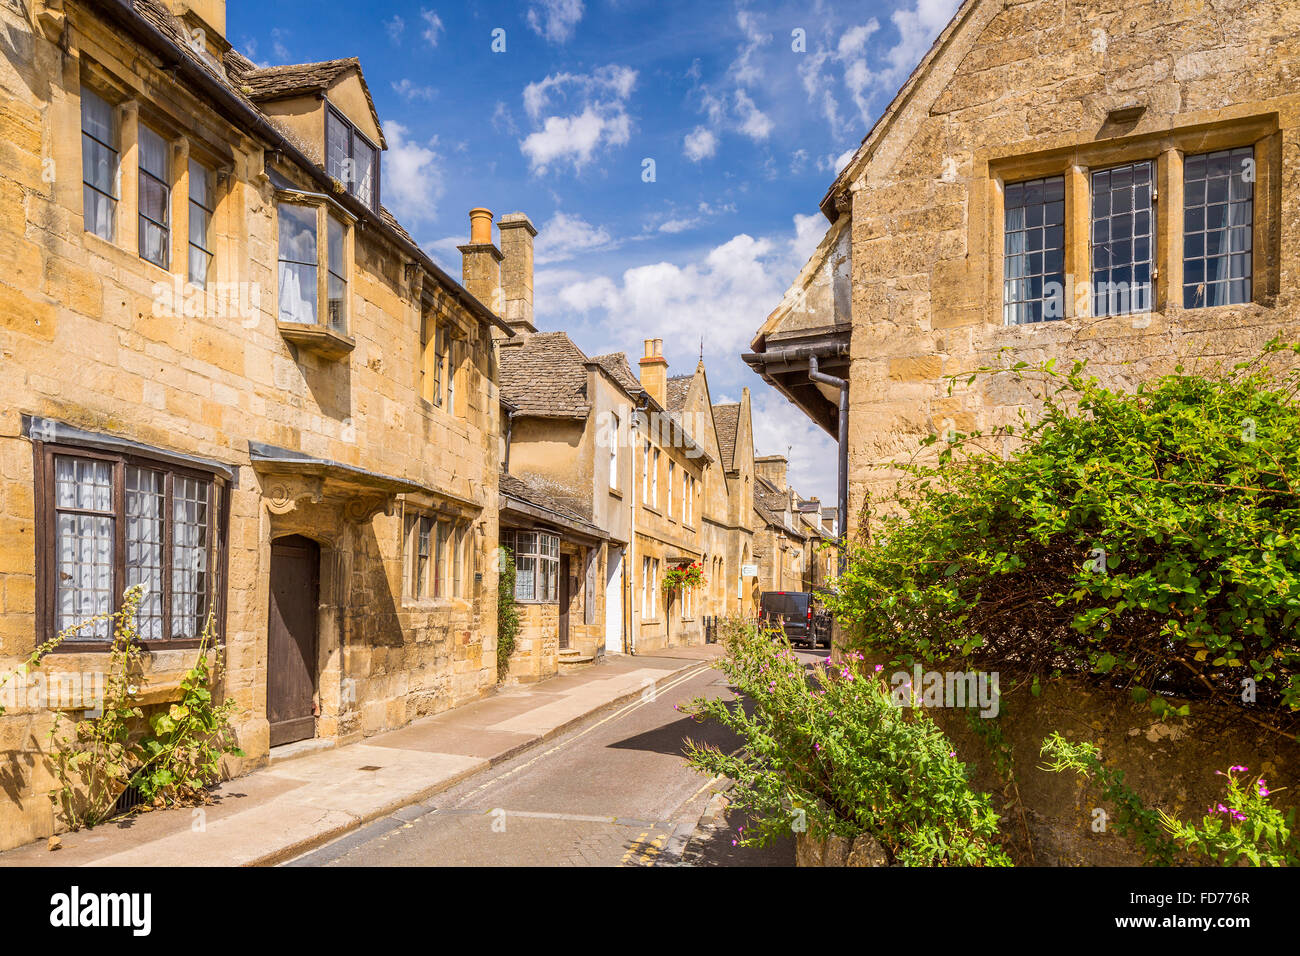 Chipping Campden, Cotswolds, Gloucestershire, Angleterre, Royaume-Uni, Europe. Banque D'Images